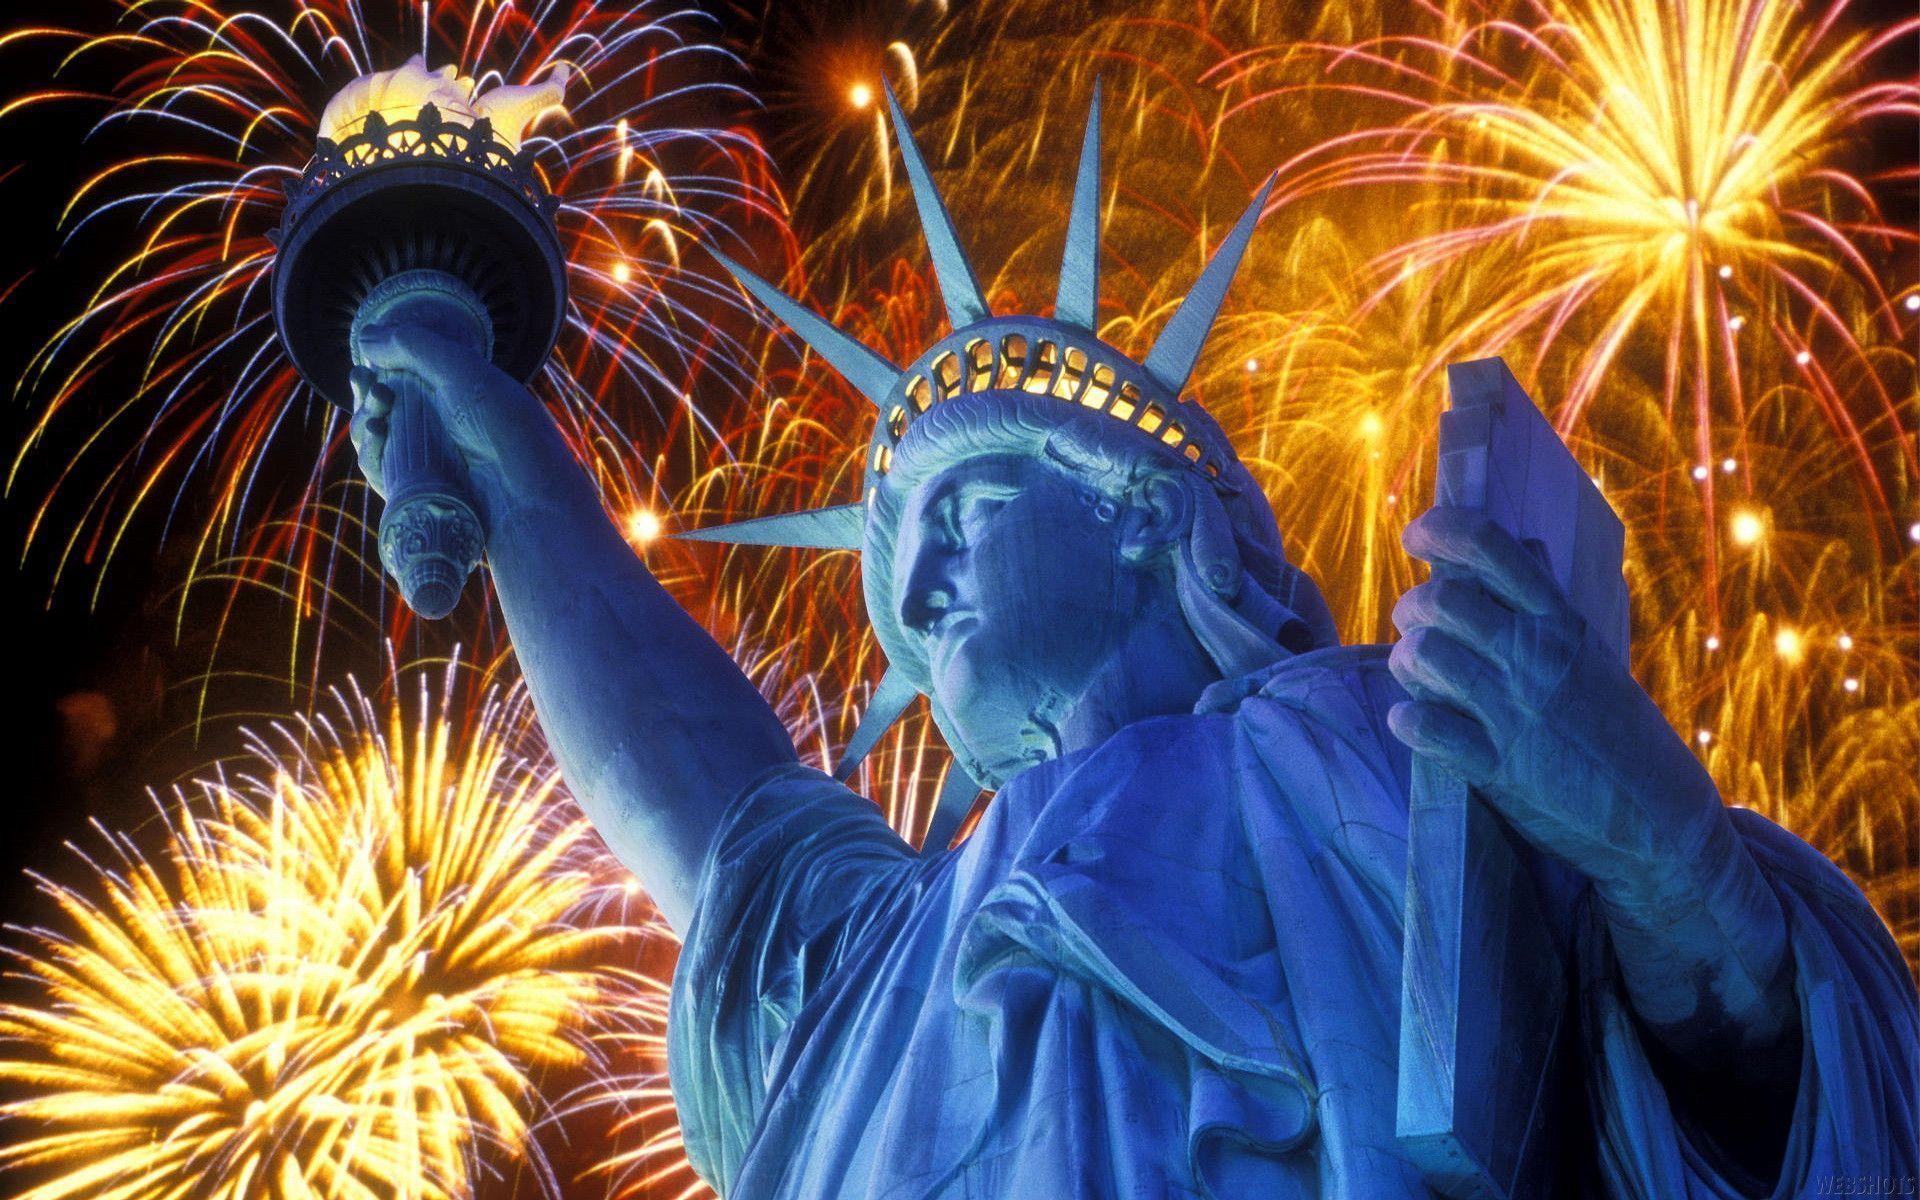 4th of July Fireworks in Statue of Liberty Exclusive HD Wallpaper